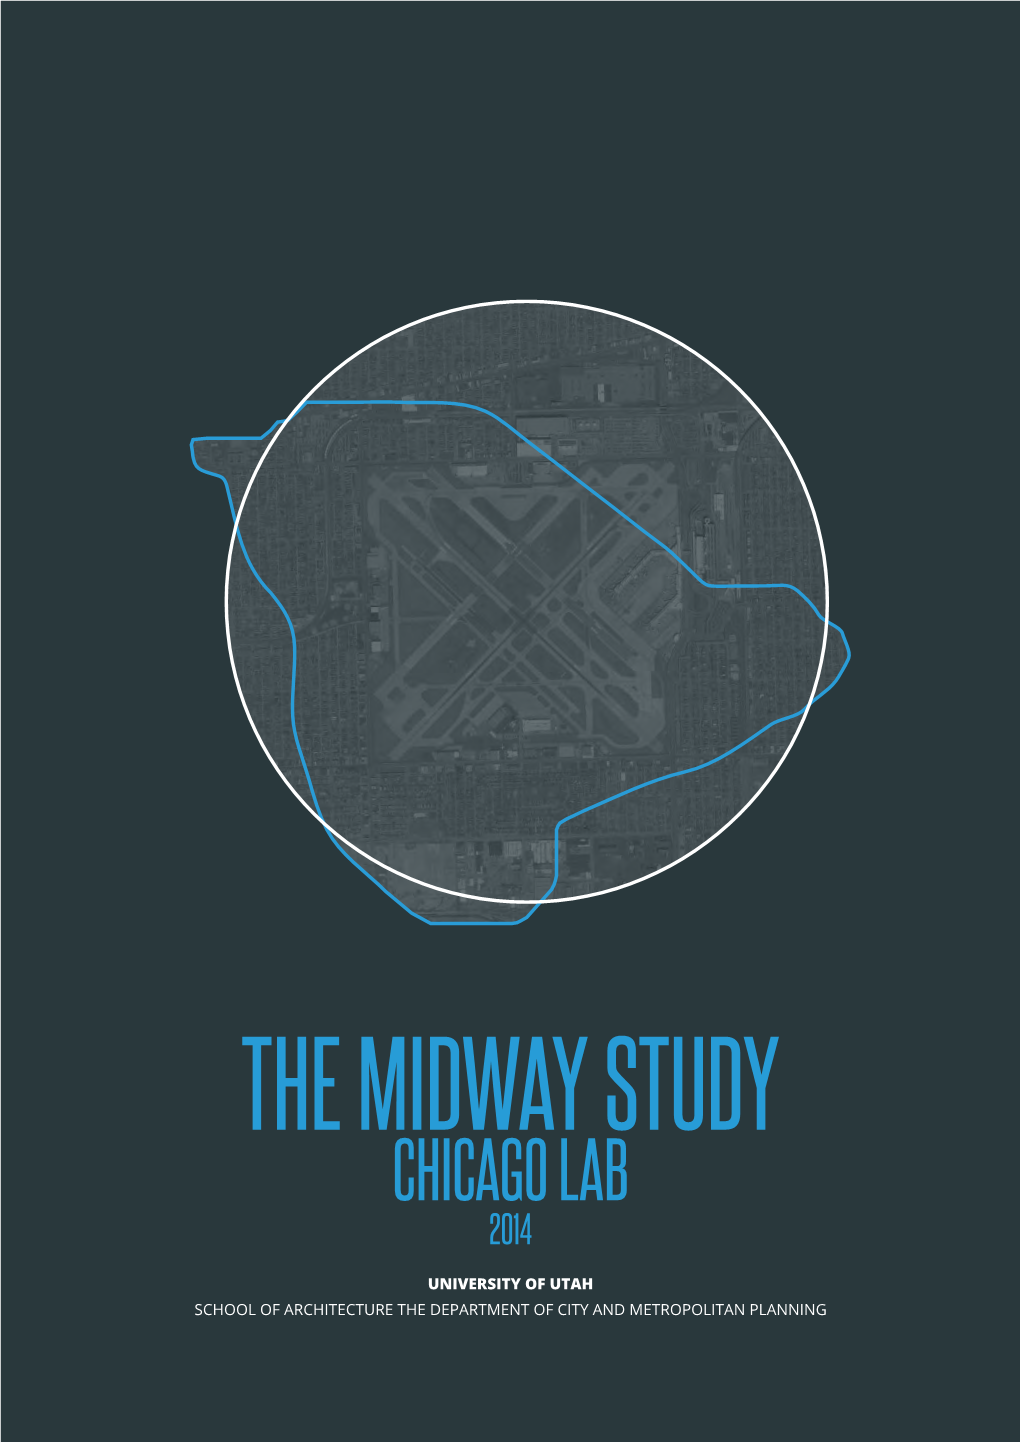 The Midway Study Chicago Lab 2014